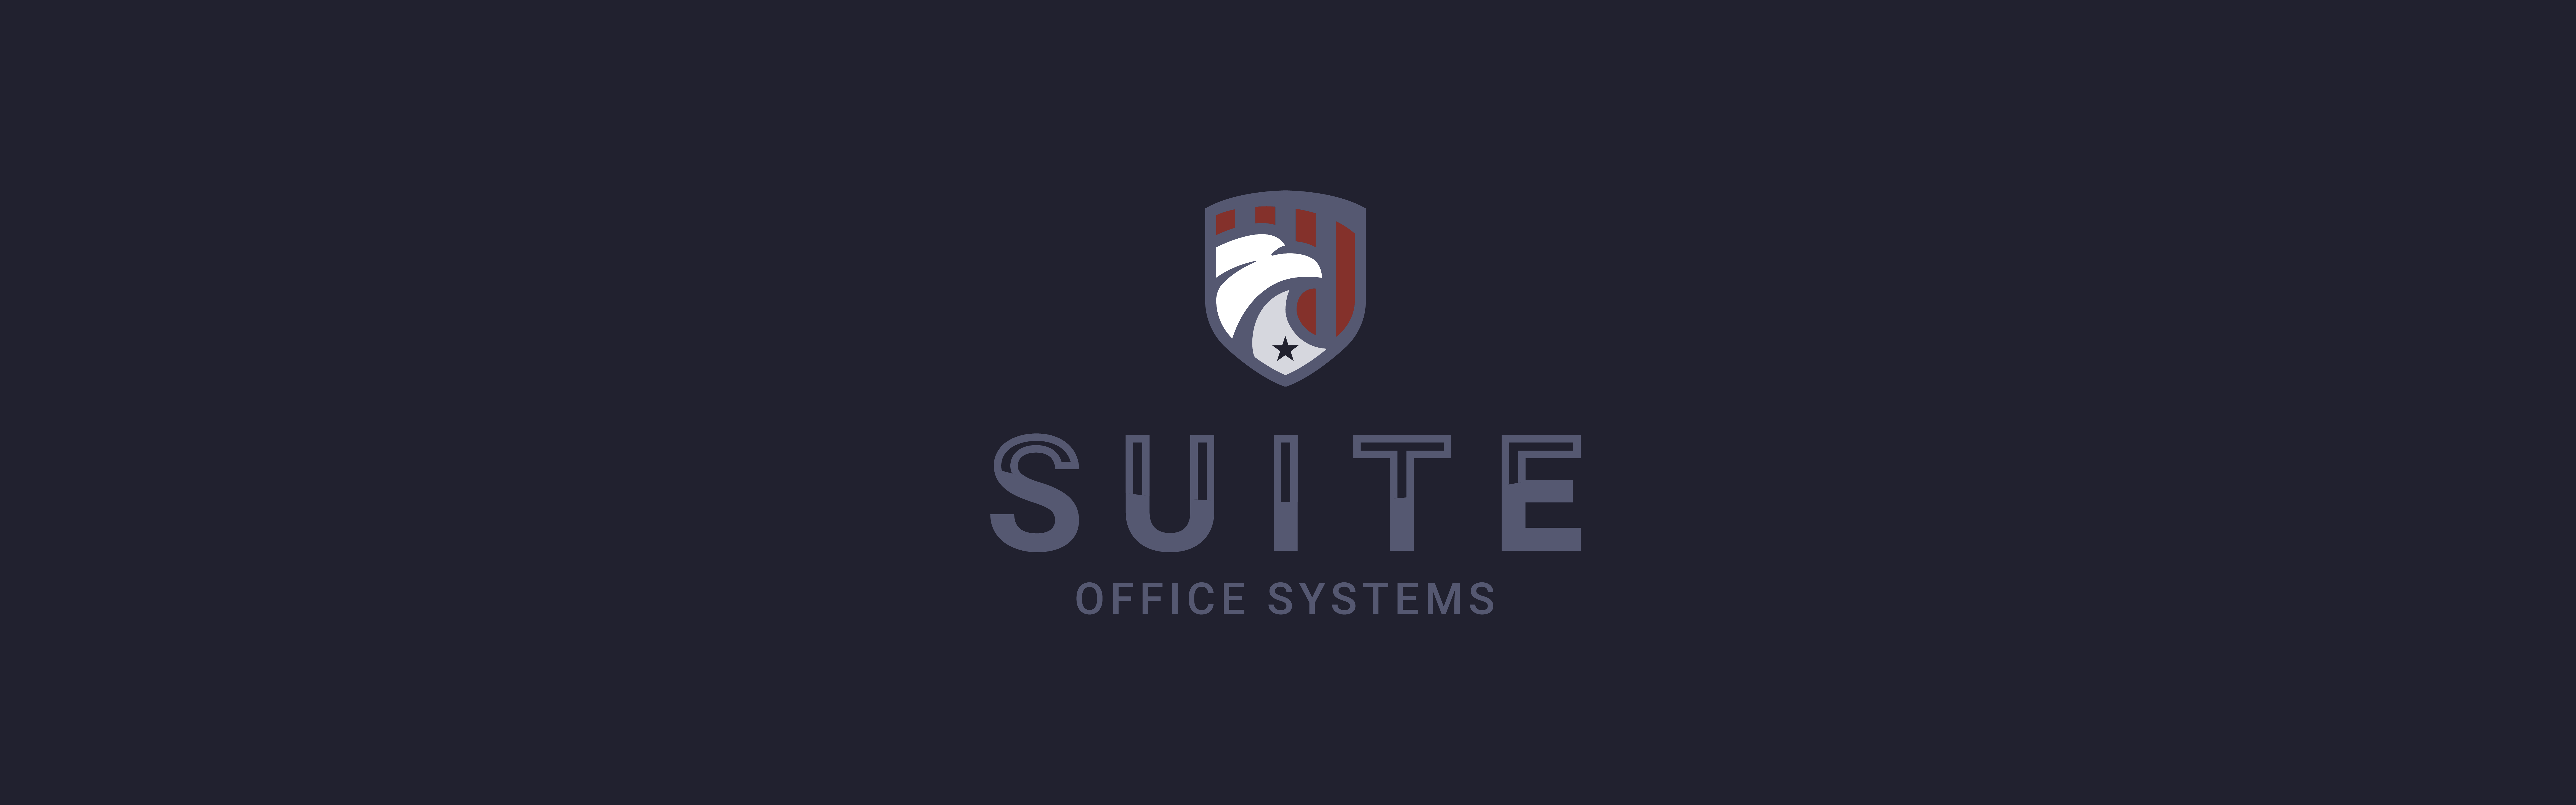 Company logo for Suite Office Systems features a stylized shield with a white knight chess piece and a three-tower castle motif, set against a dark blue background.